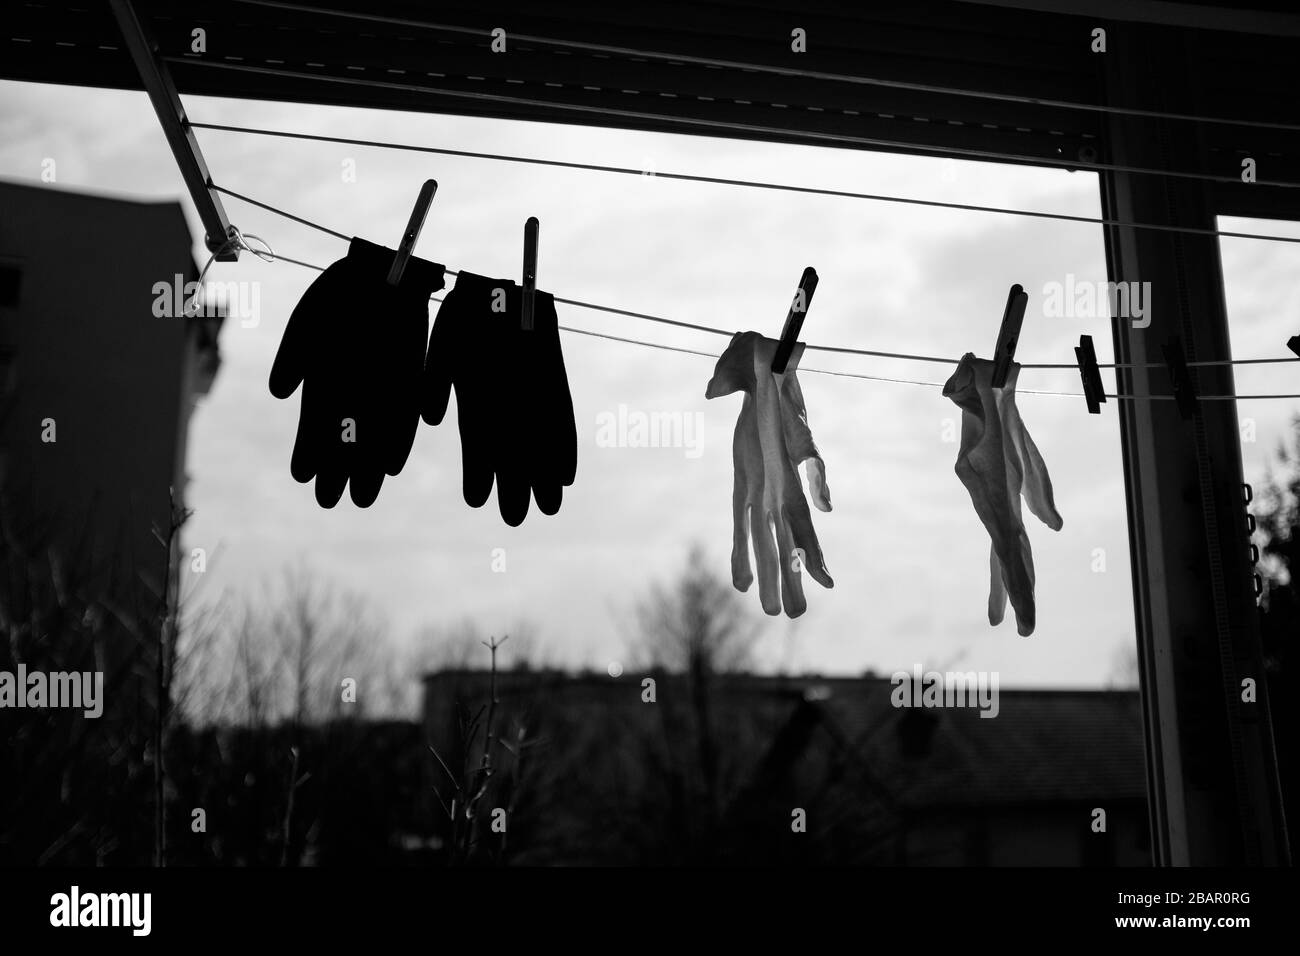 Kranj, Slovenia, March 21, 2020: Washable protective hand gloves hang out on the balcony to dry during the coronavirus outbreak nationwide lockdown. Stock Photo